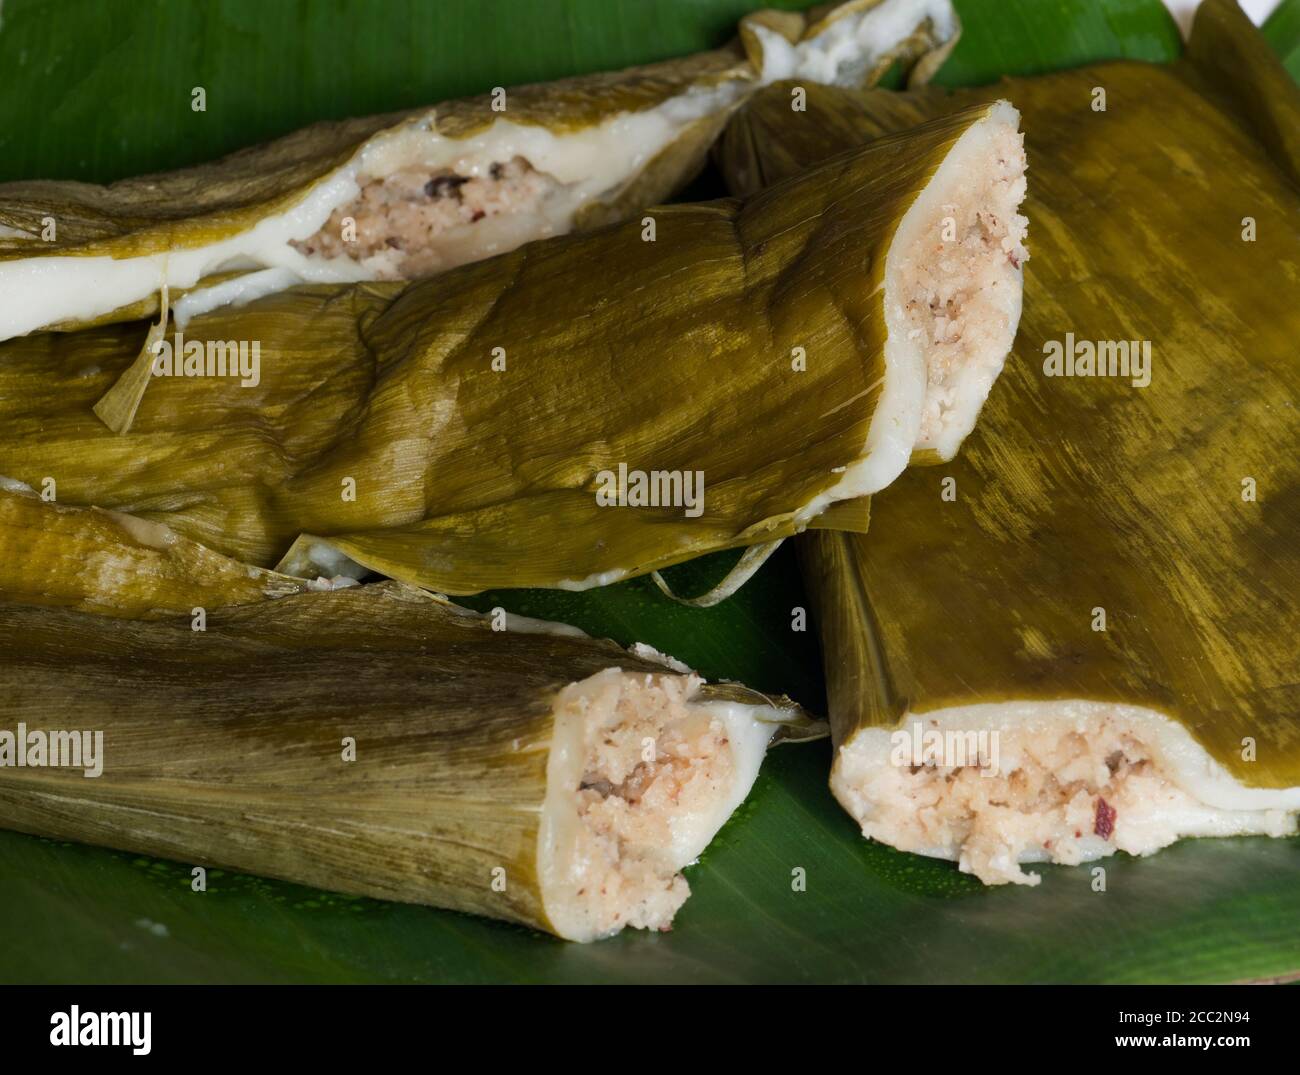 Indian sweet made of steamed rice flour filled with jaggery, cardamom and coconut. Wrapped in turmeric leaves and steam cooked in large vessel. Stock Photo